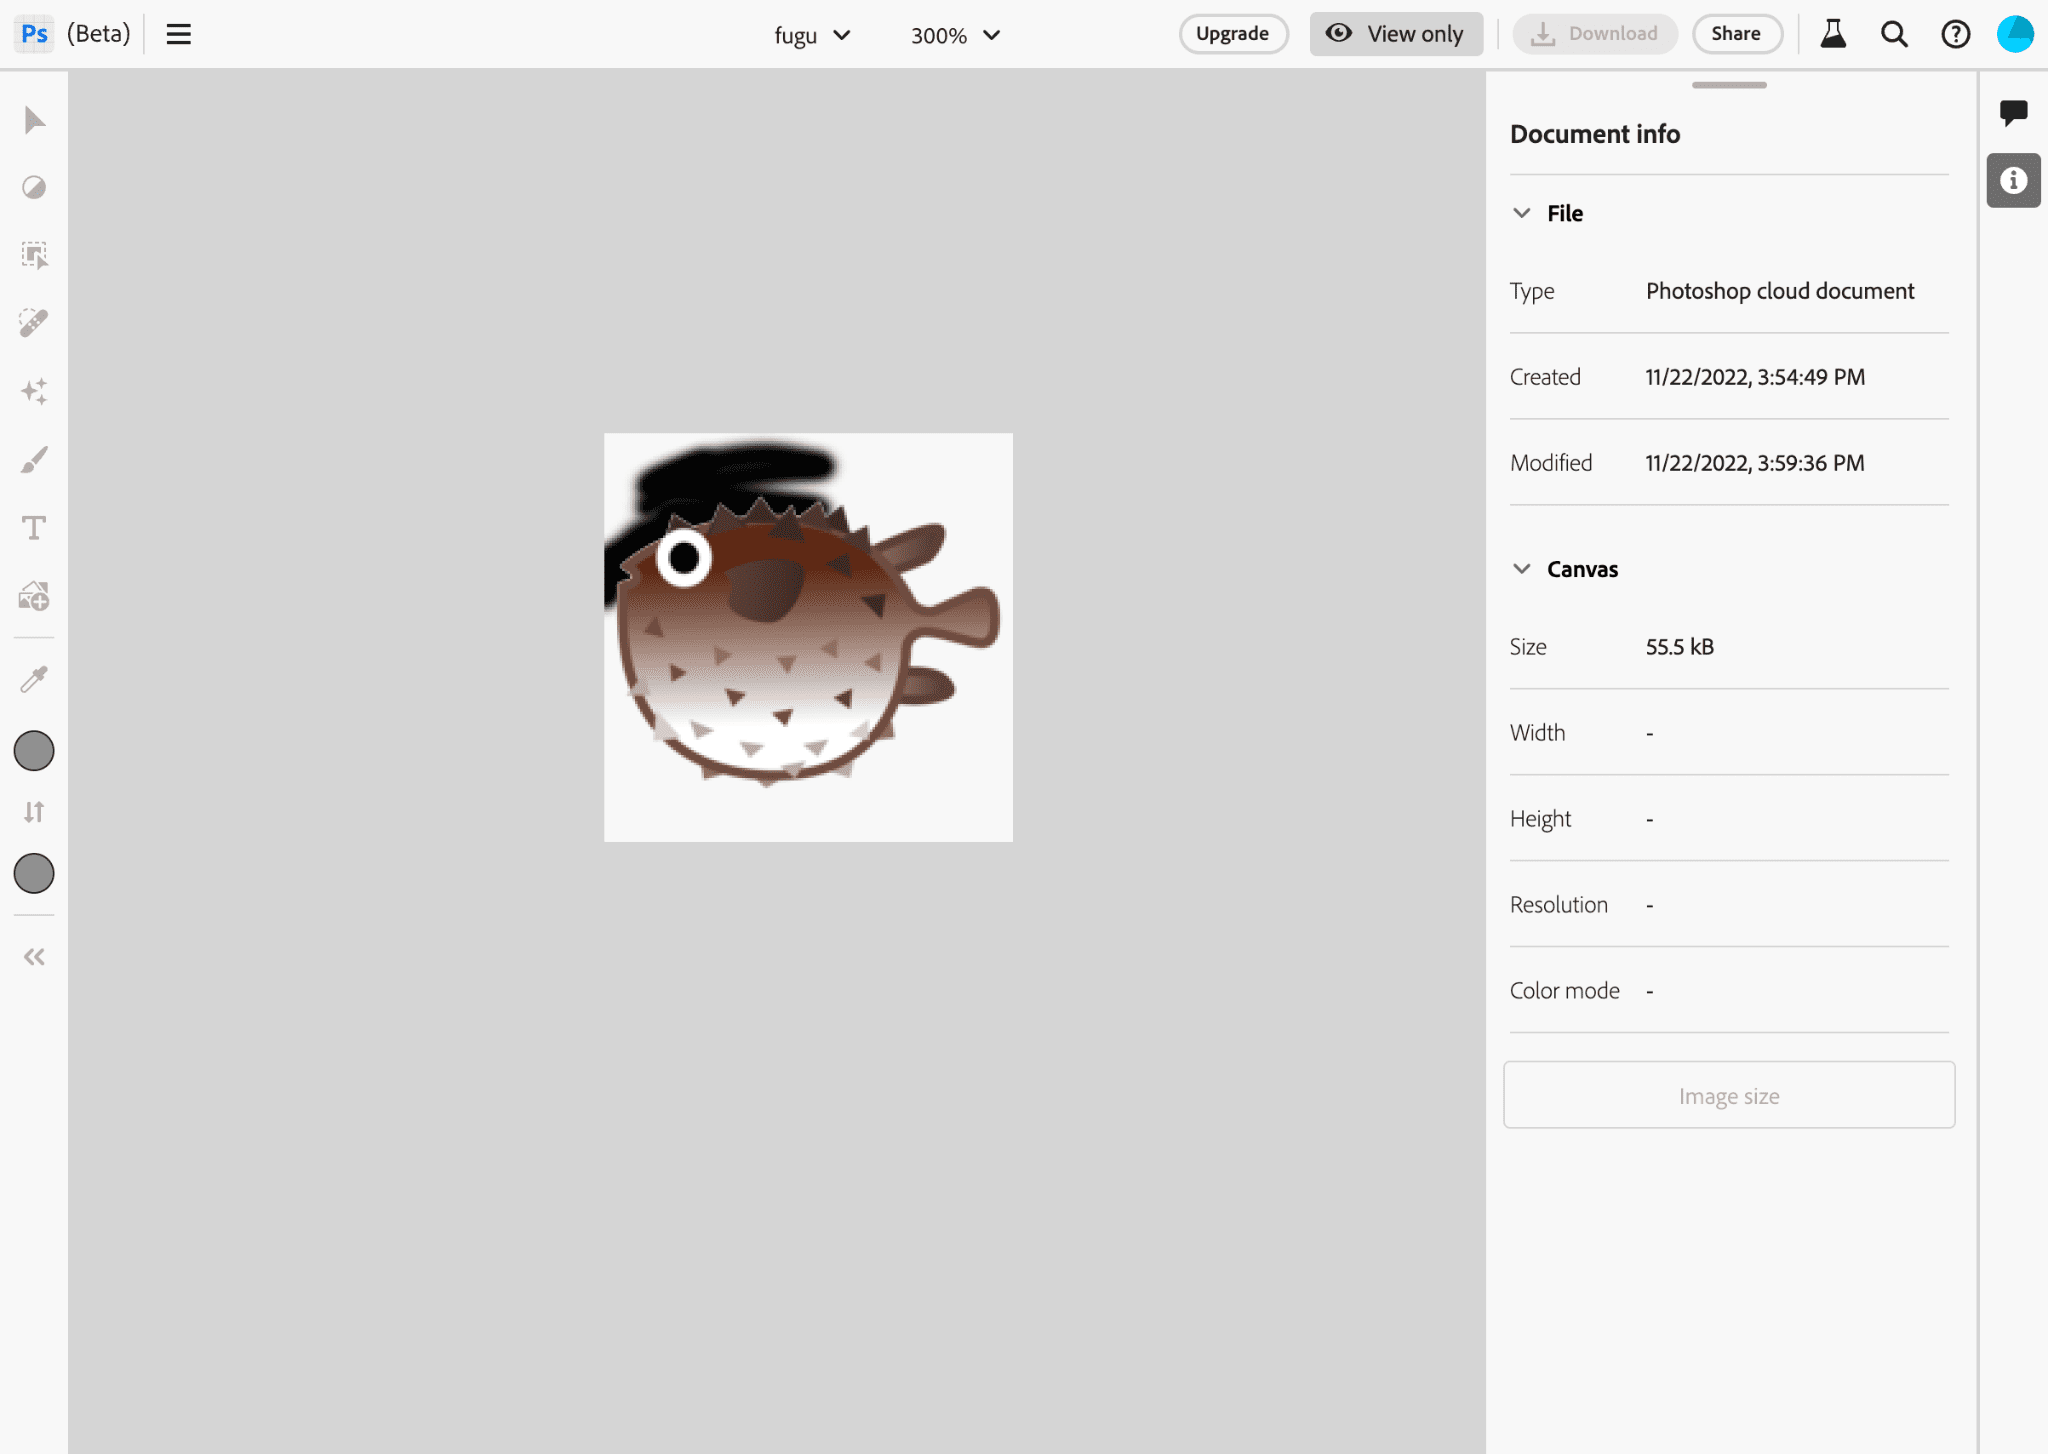 The Photoshop app while editing an image of the Project Fugu logo.